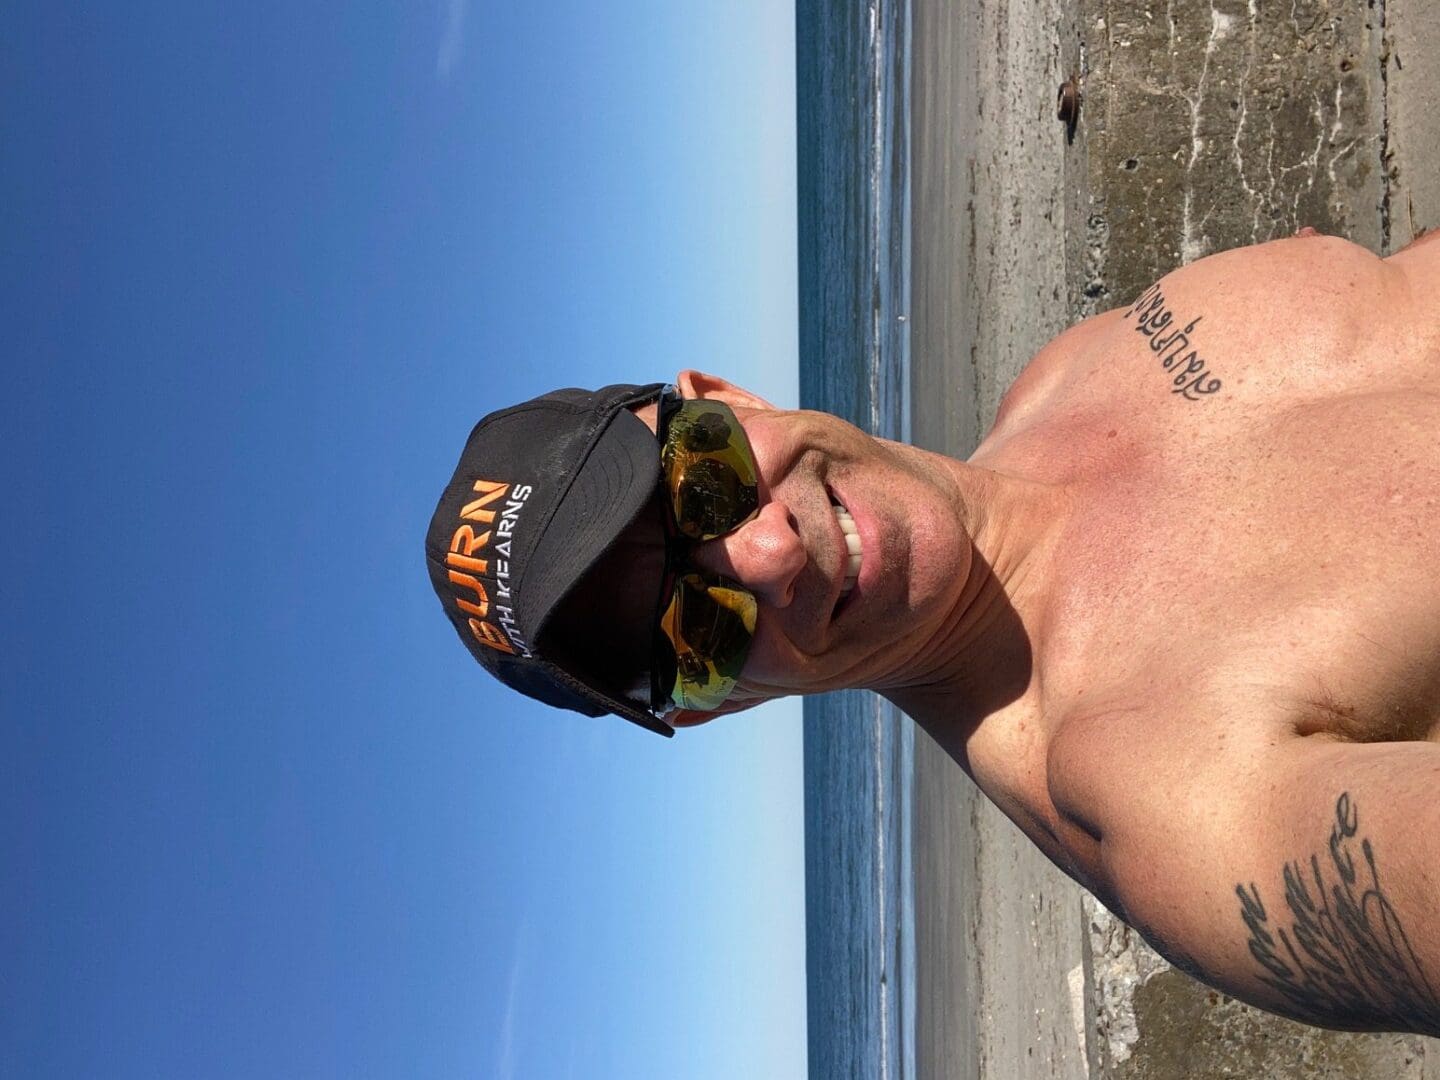 A man in a shirt and hat taking a selfie on the beach.